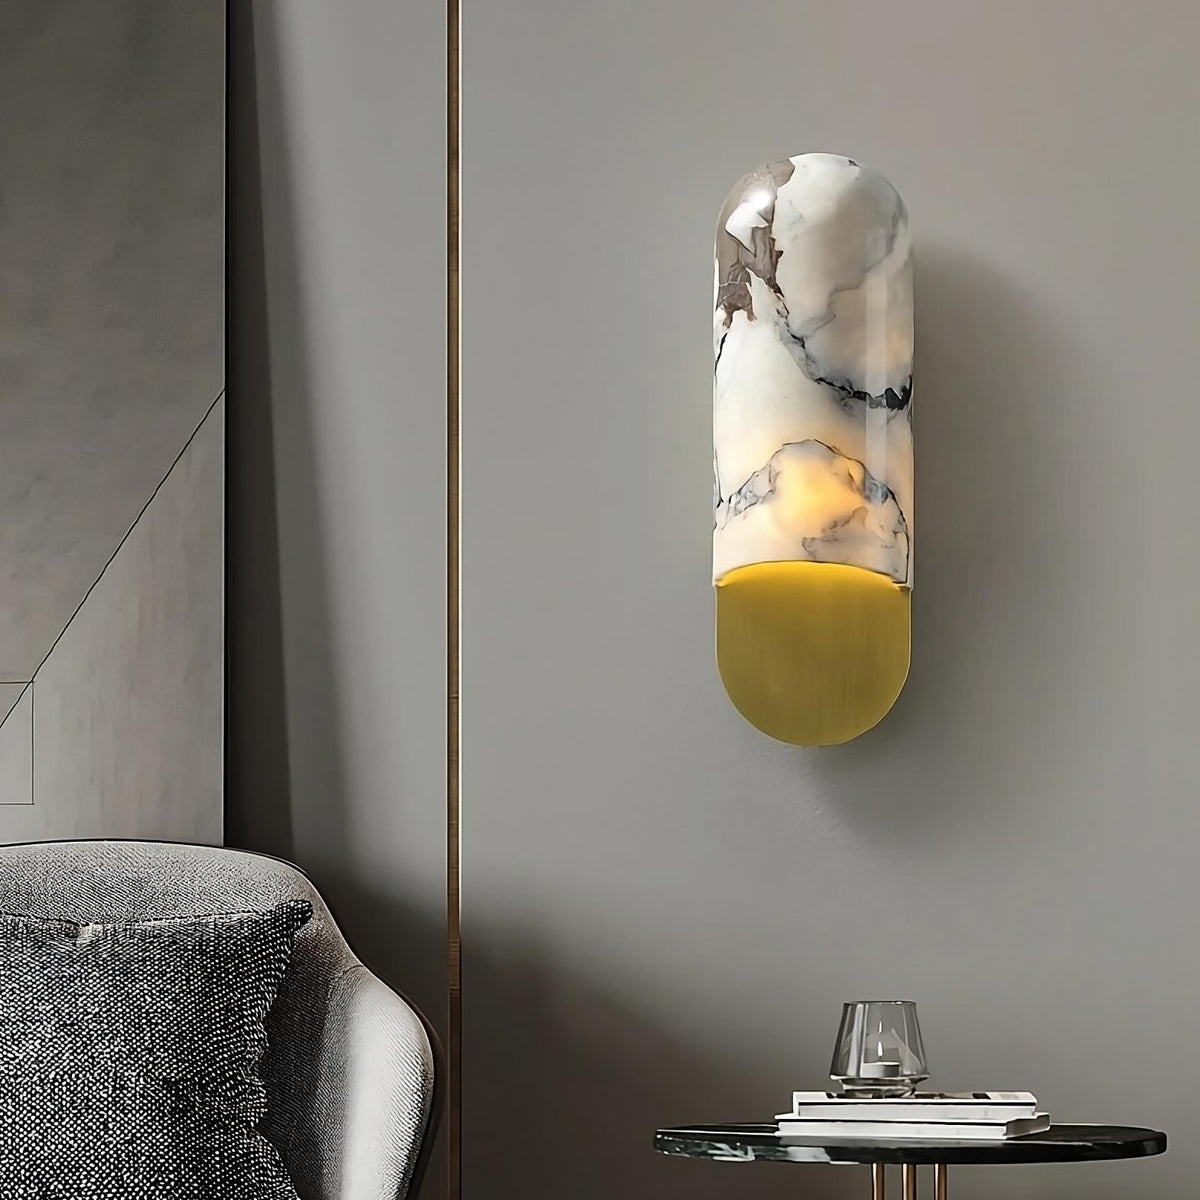 A Natural Marble Wall Sconce Light Fixture by Morsale.com hangs on a sleek gray wall above a small round side table with a glass of water. Part of a gray armchair with textured fabric is visible in the foreground. The room features minimalist and contemporary decor.